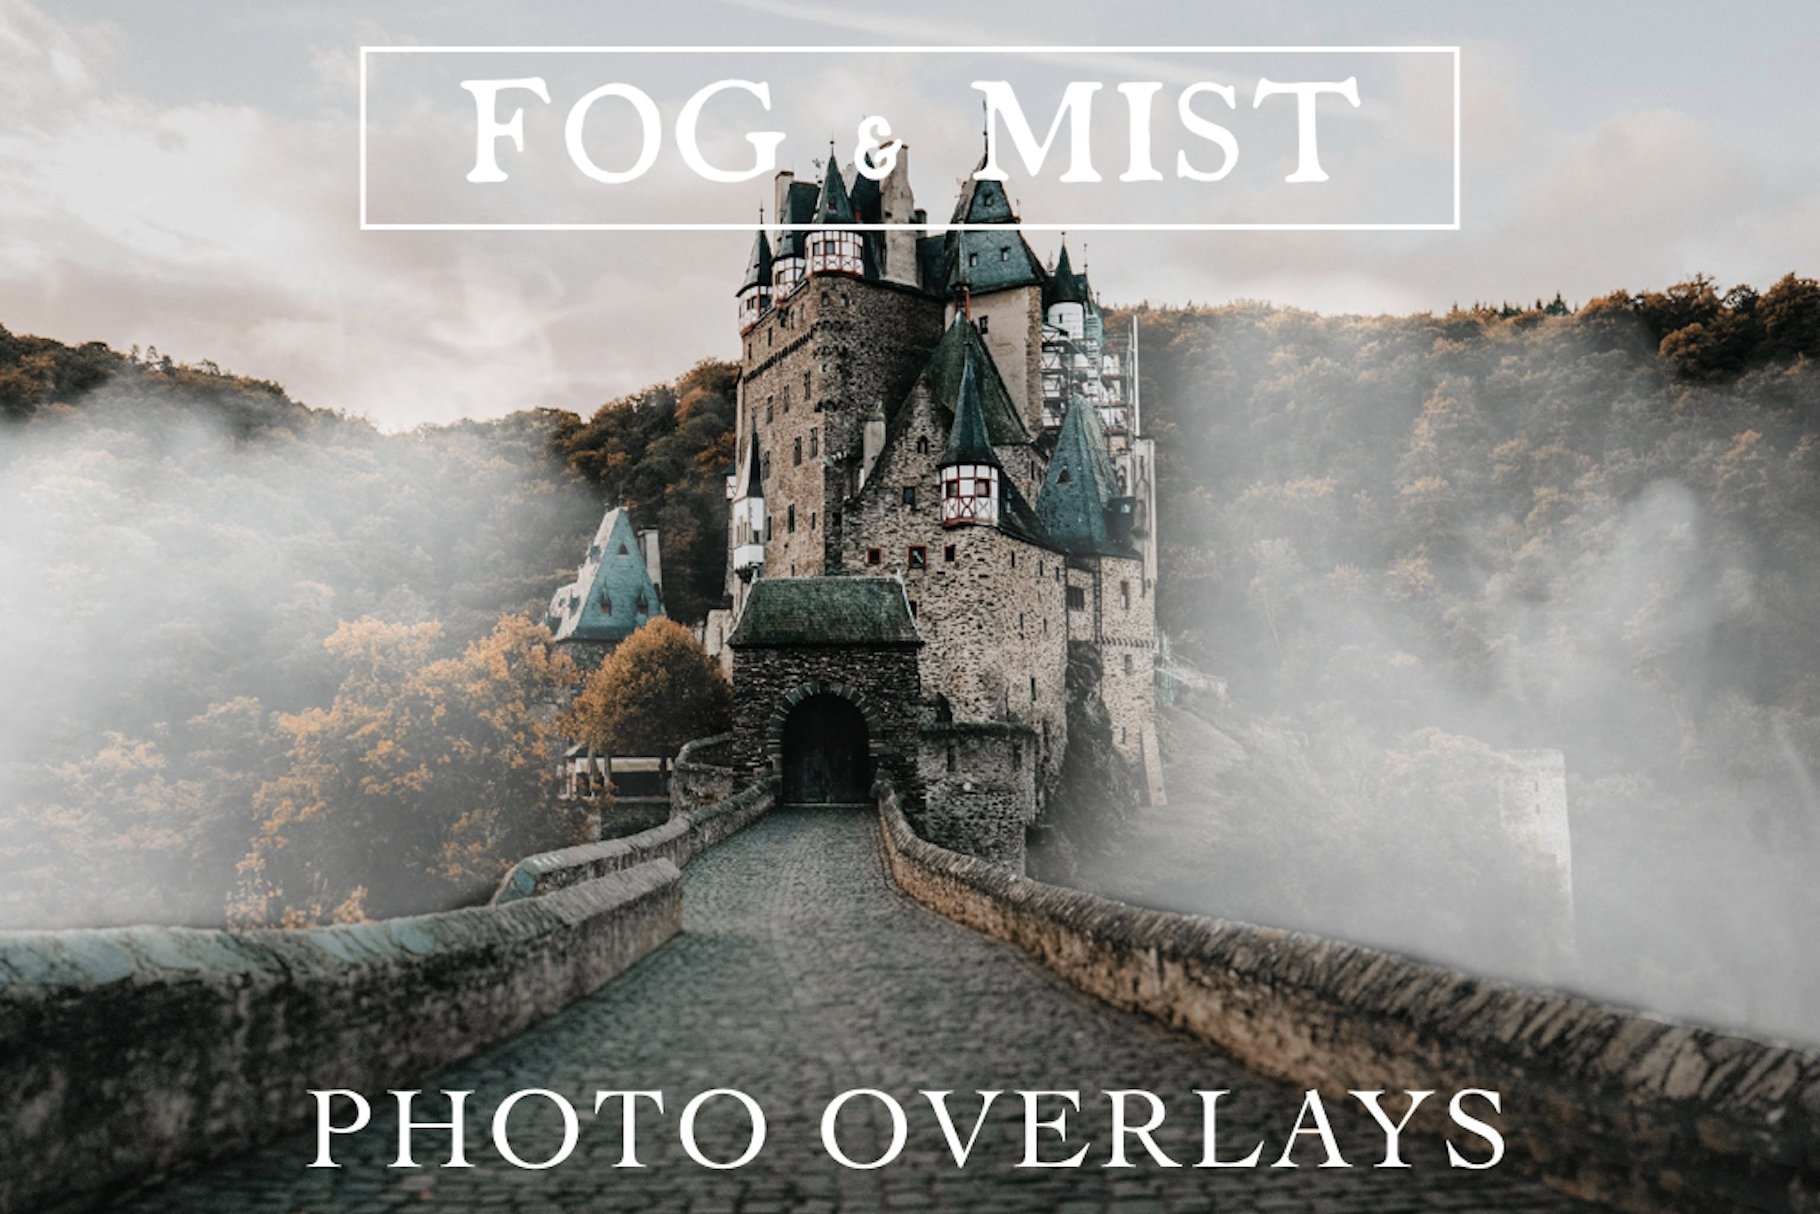 30 Real Fog & Mist Photo Overlayscover image.